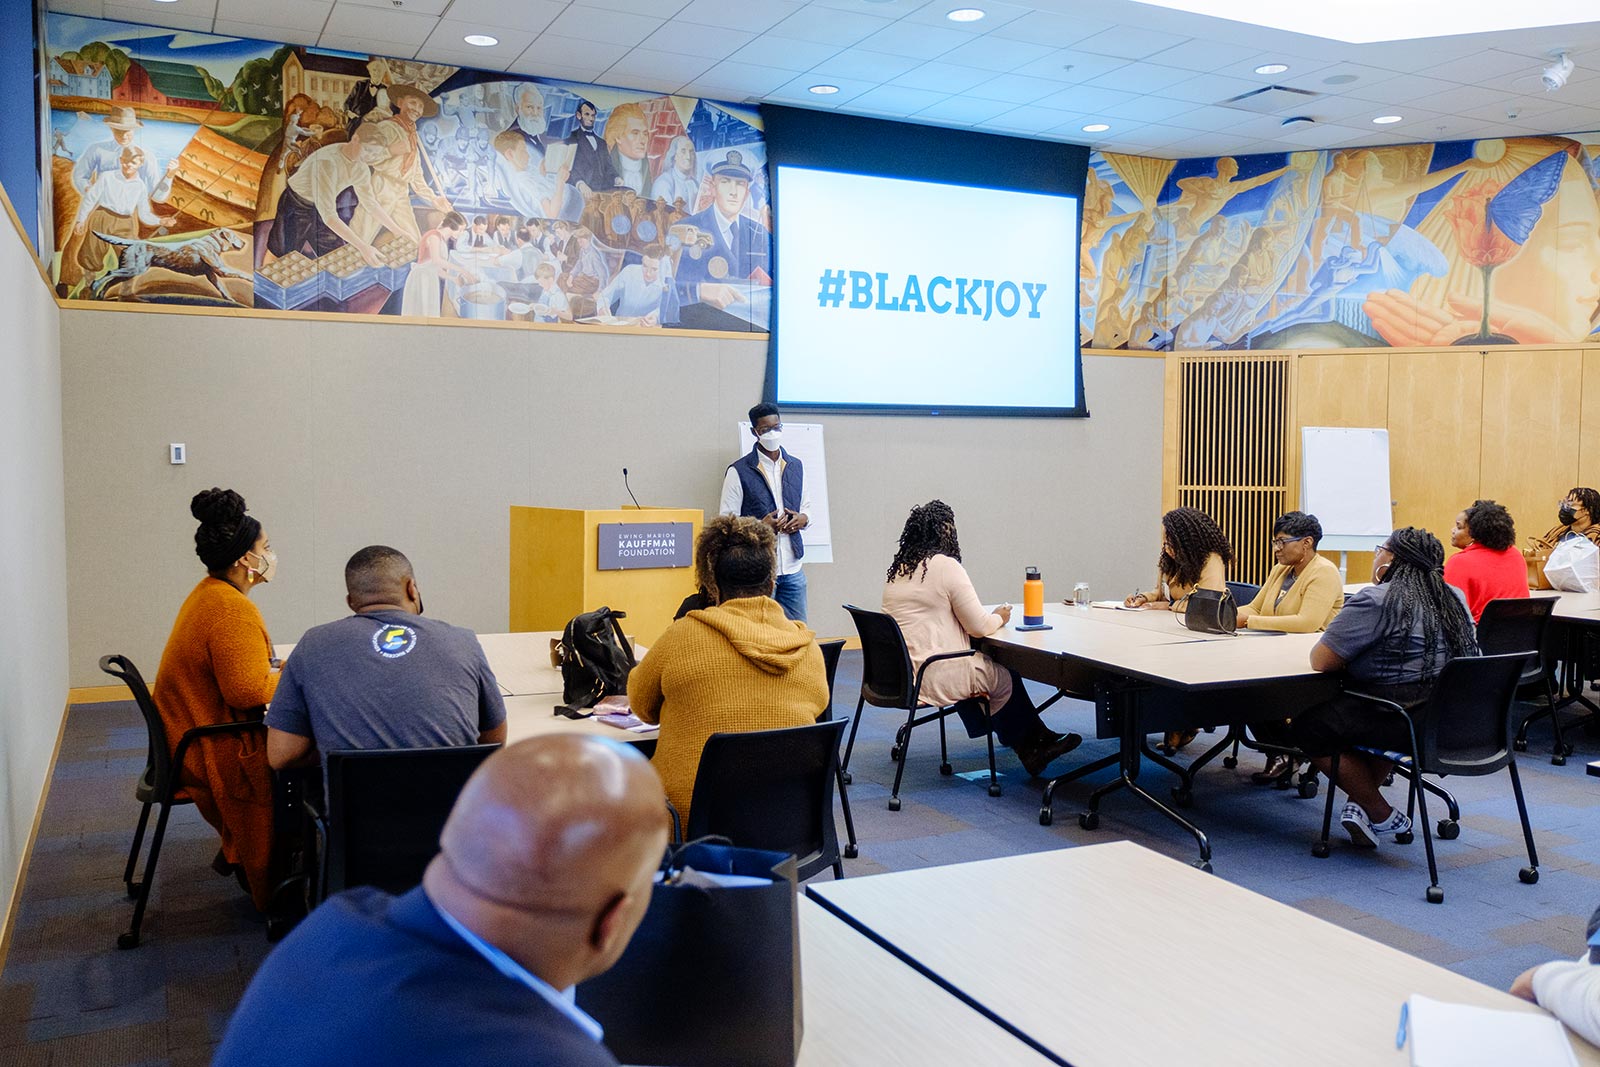 A breakout session at the 2021 Amplify Conference. The screen reads: "#BLACKJOY"